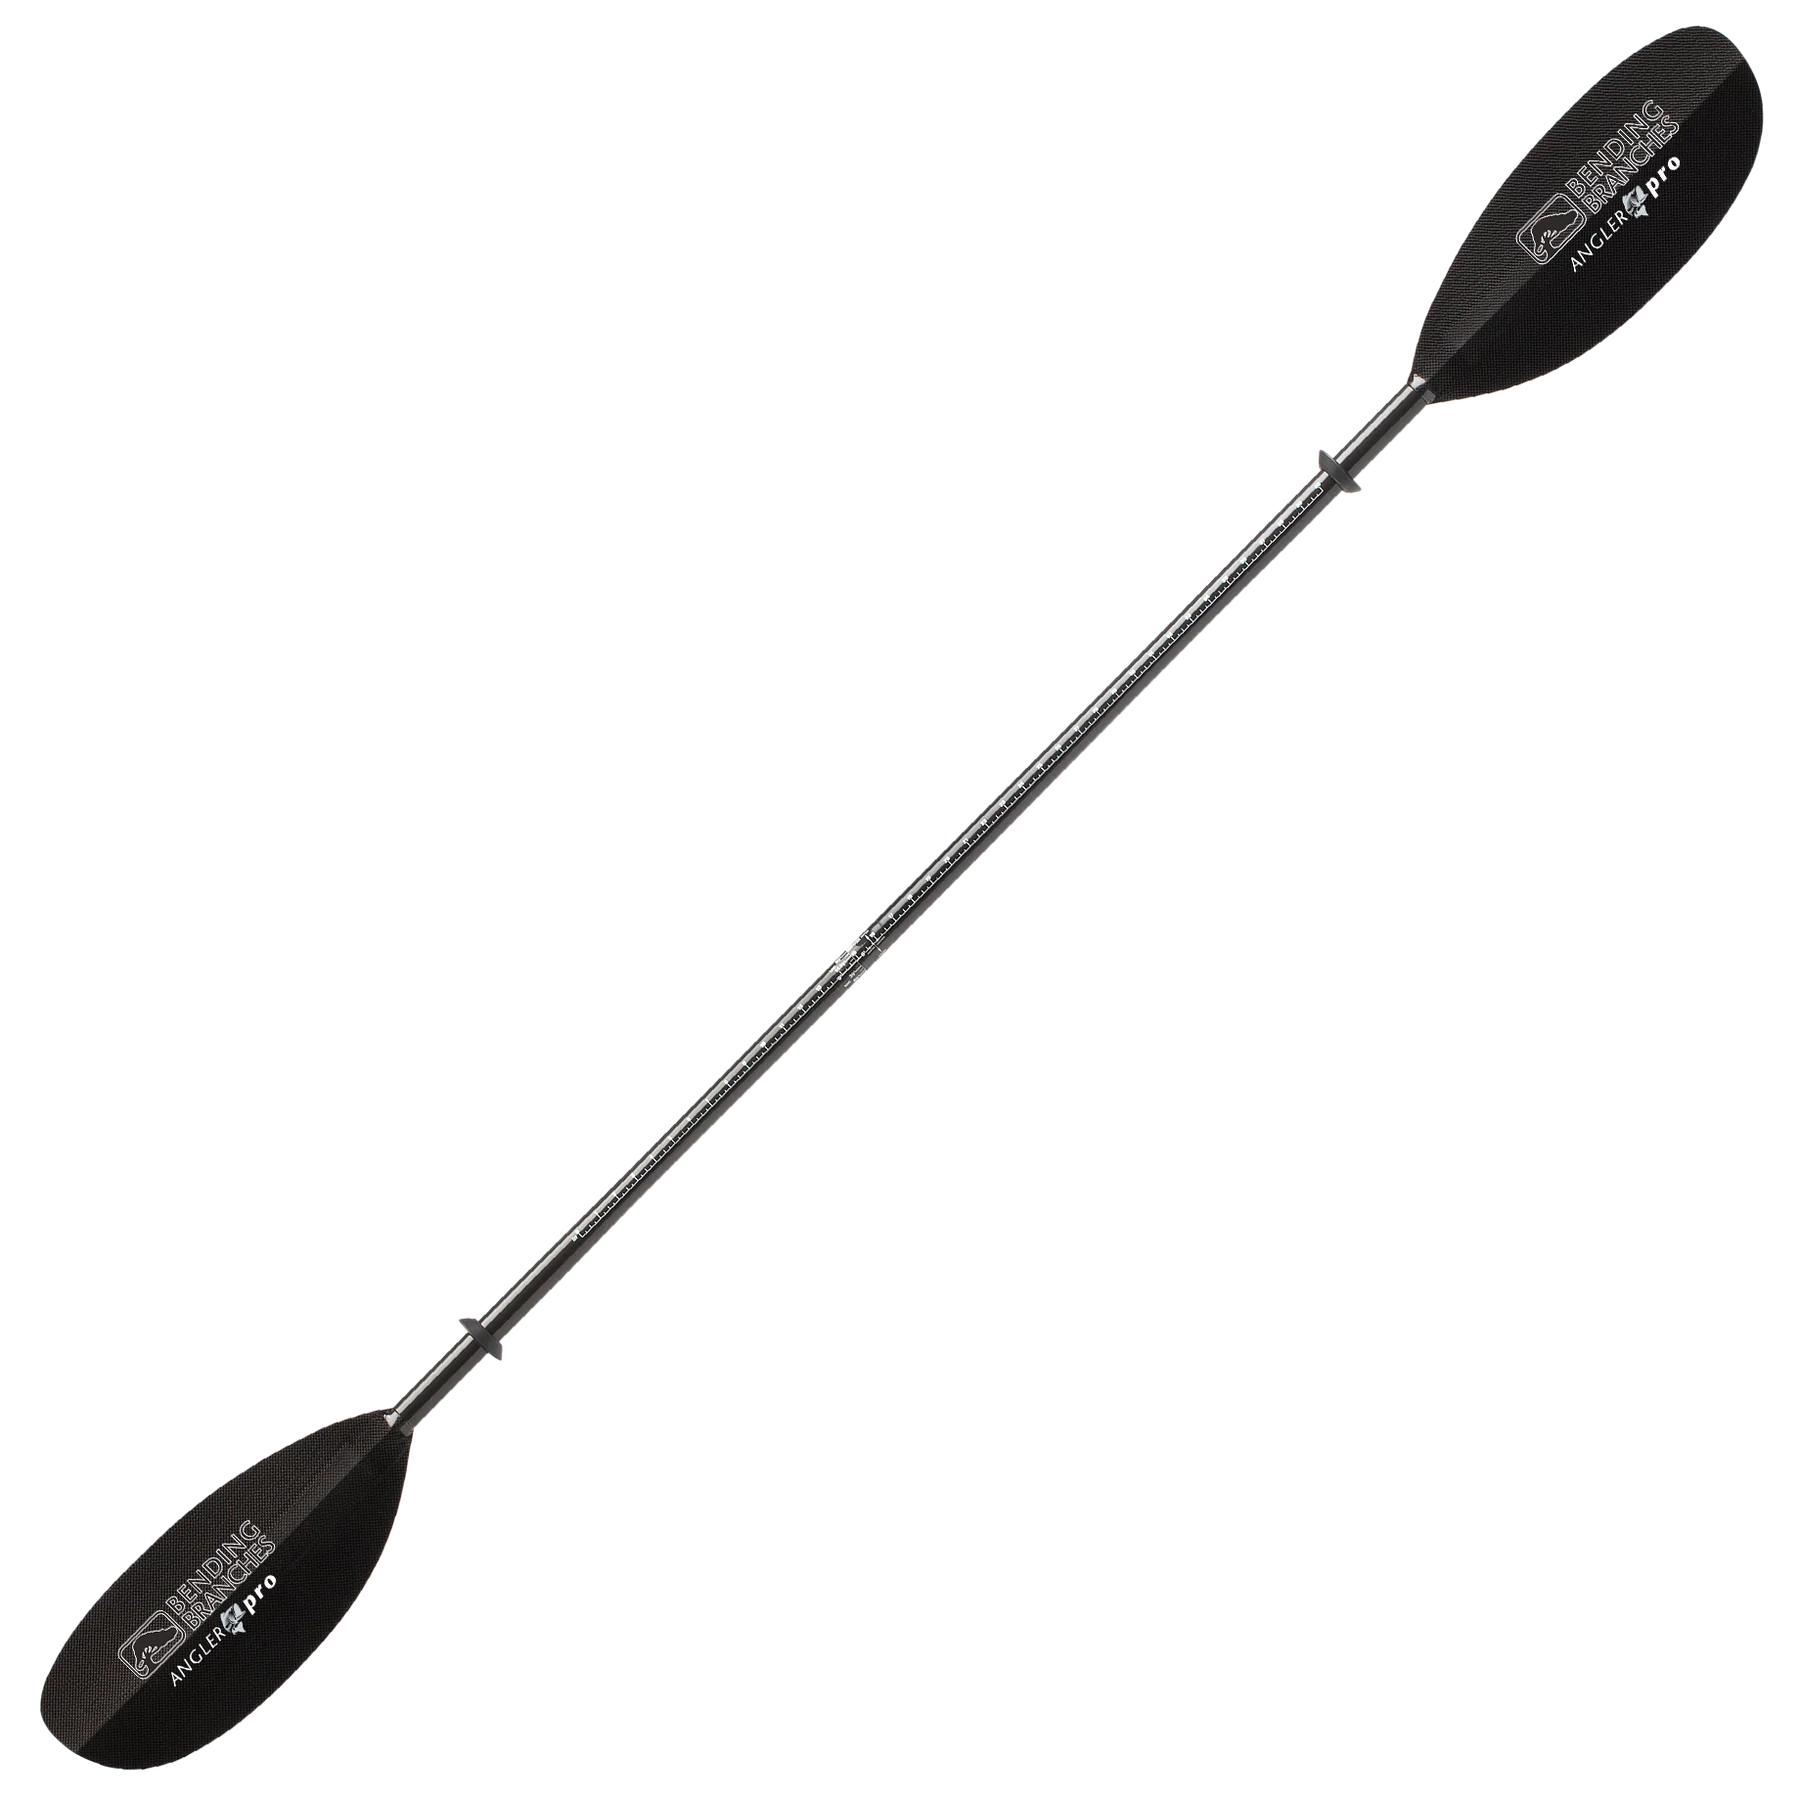 Angler Pro Snap Paddle, Carbon, 240